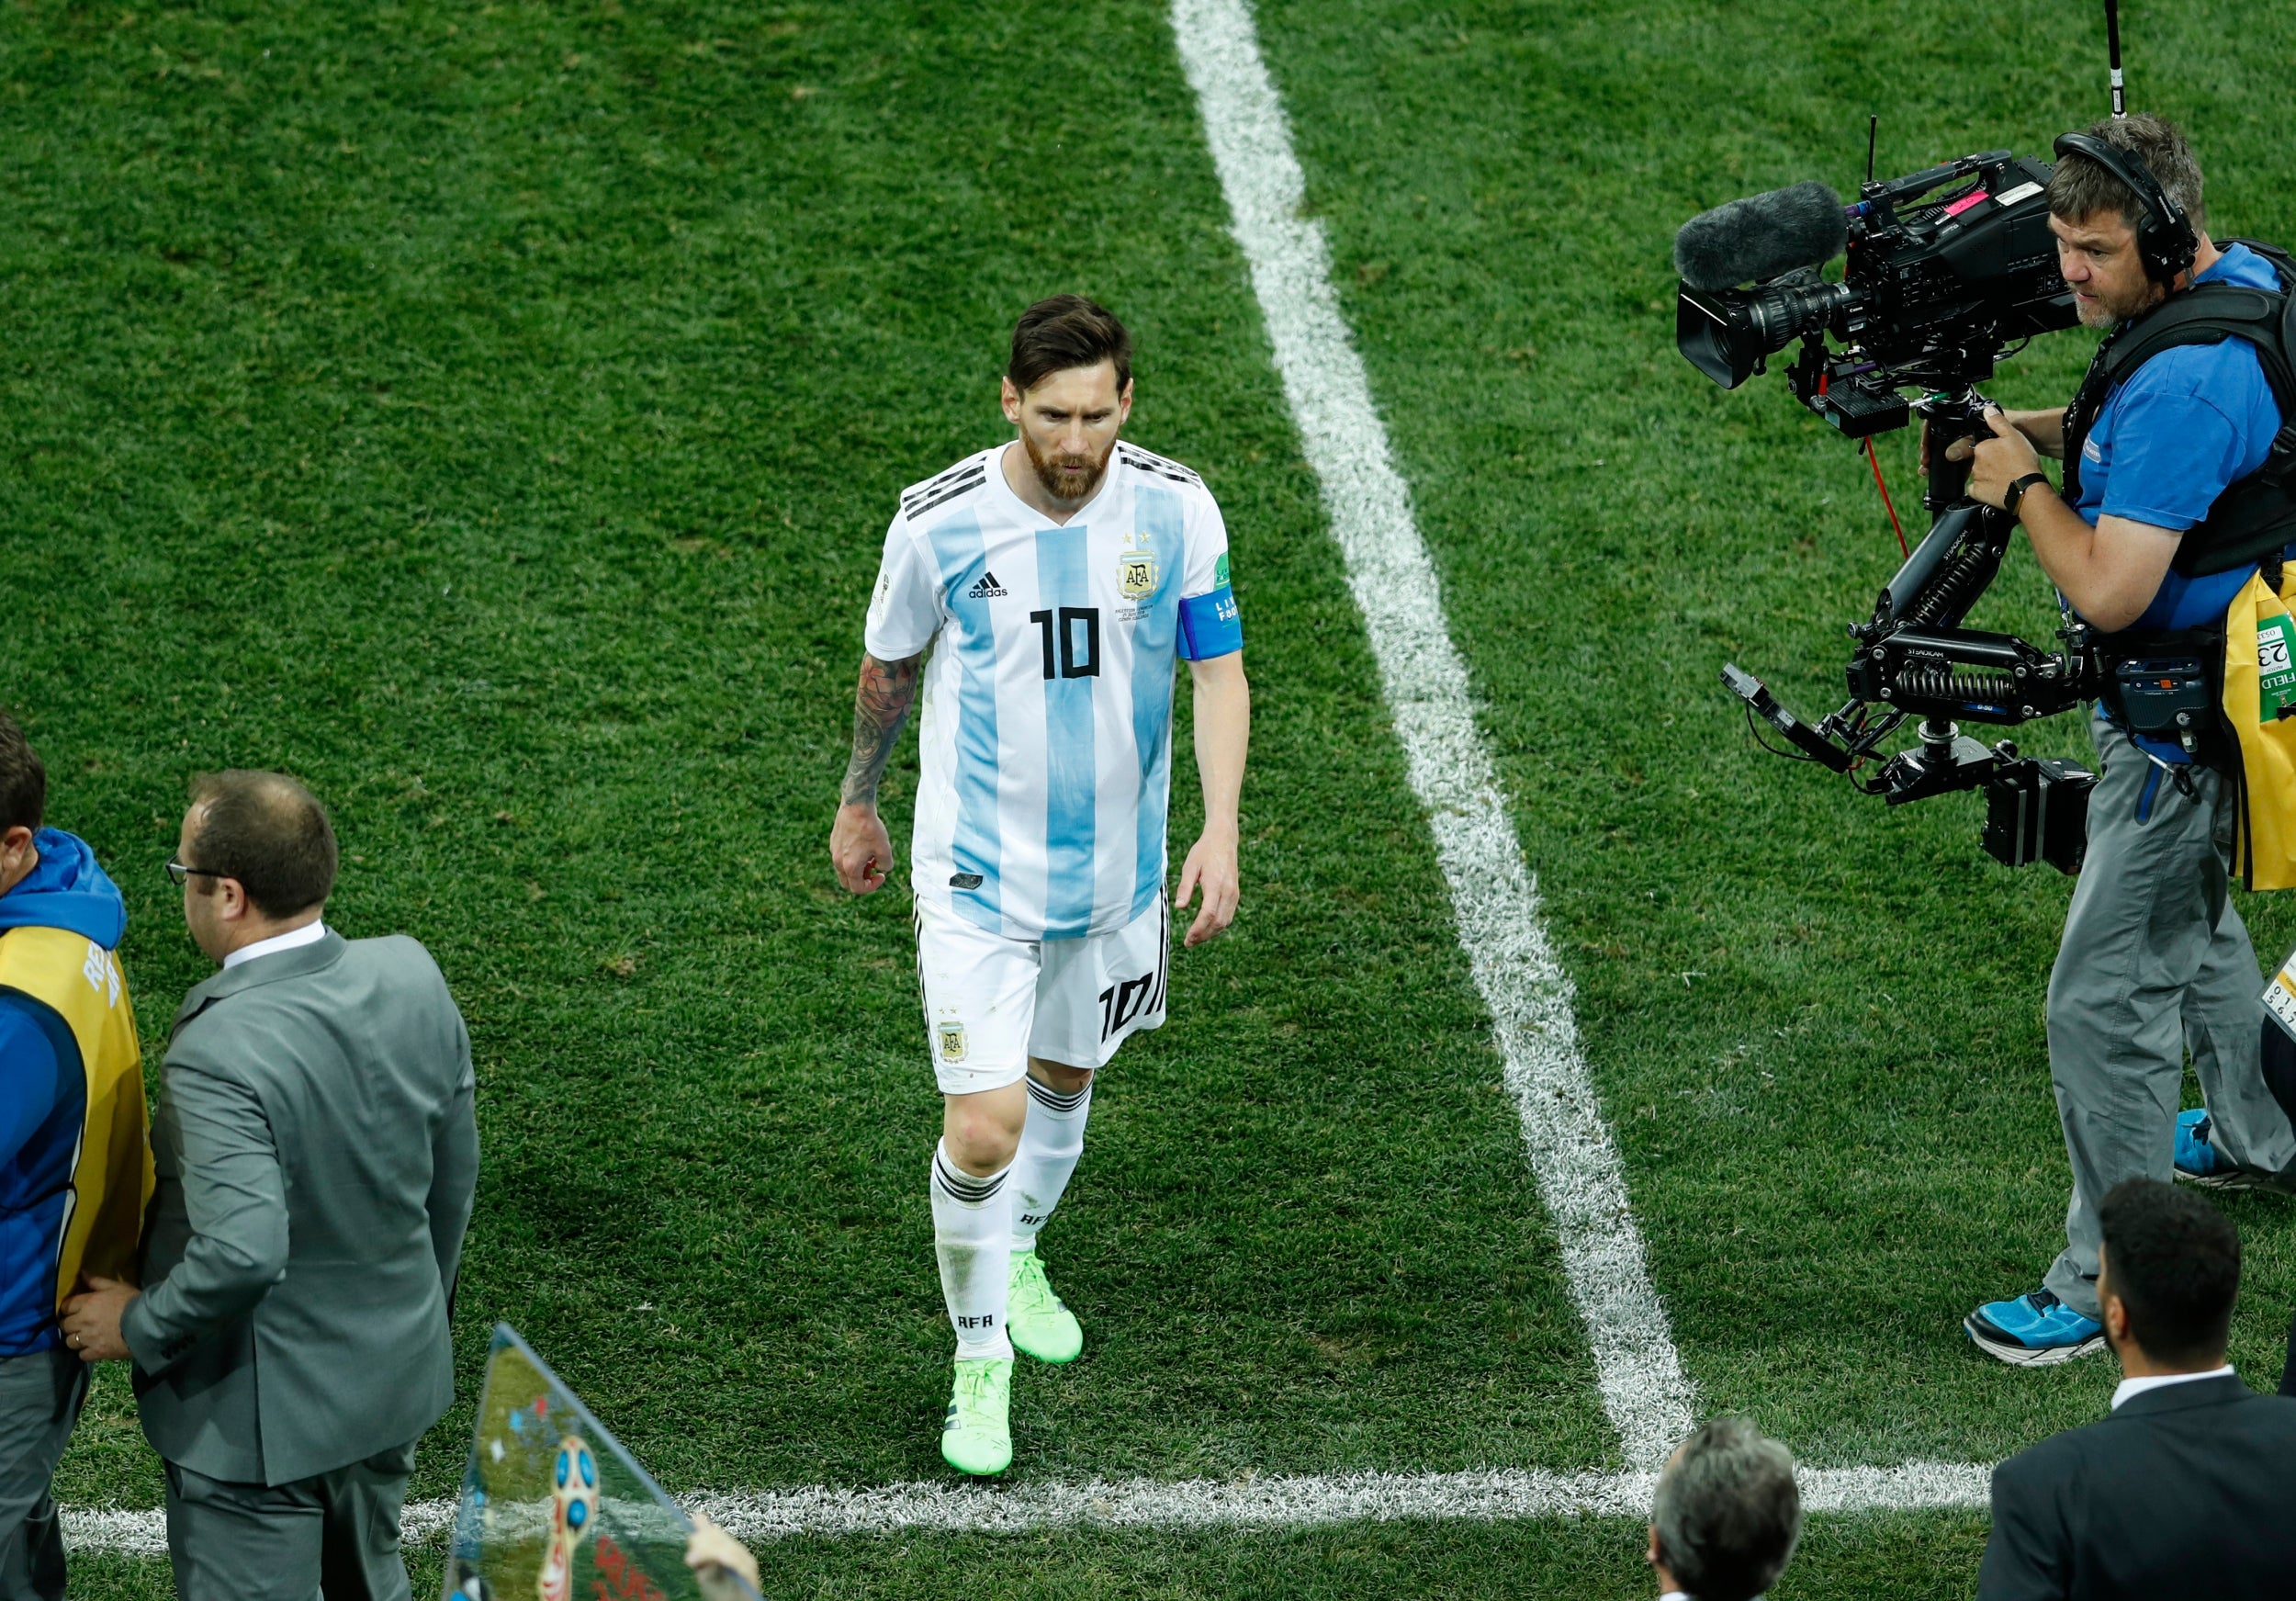 This, surely, is where it all ends for Messi and Argentina